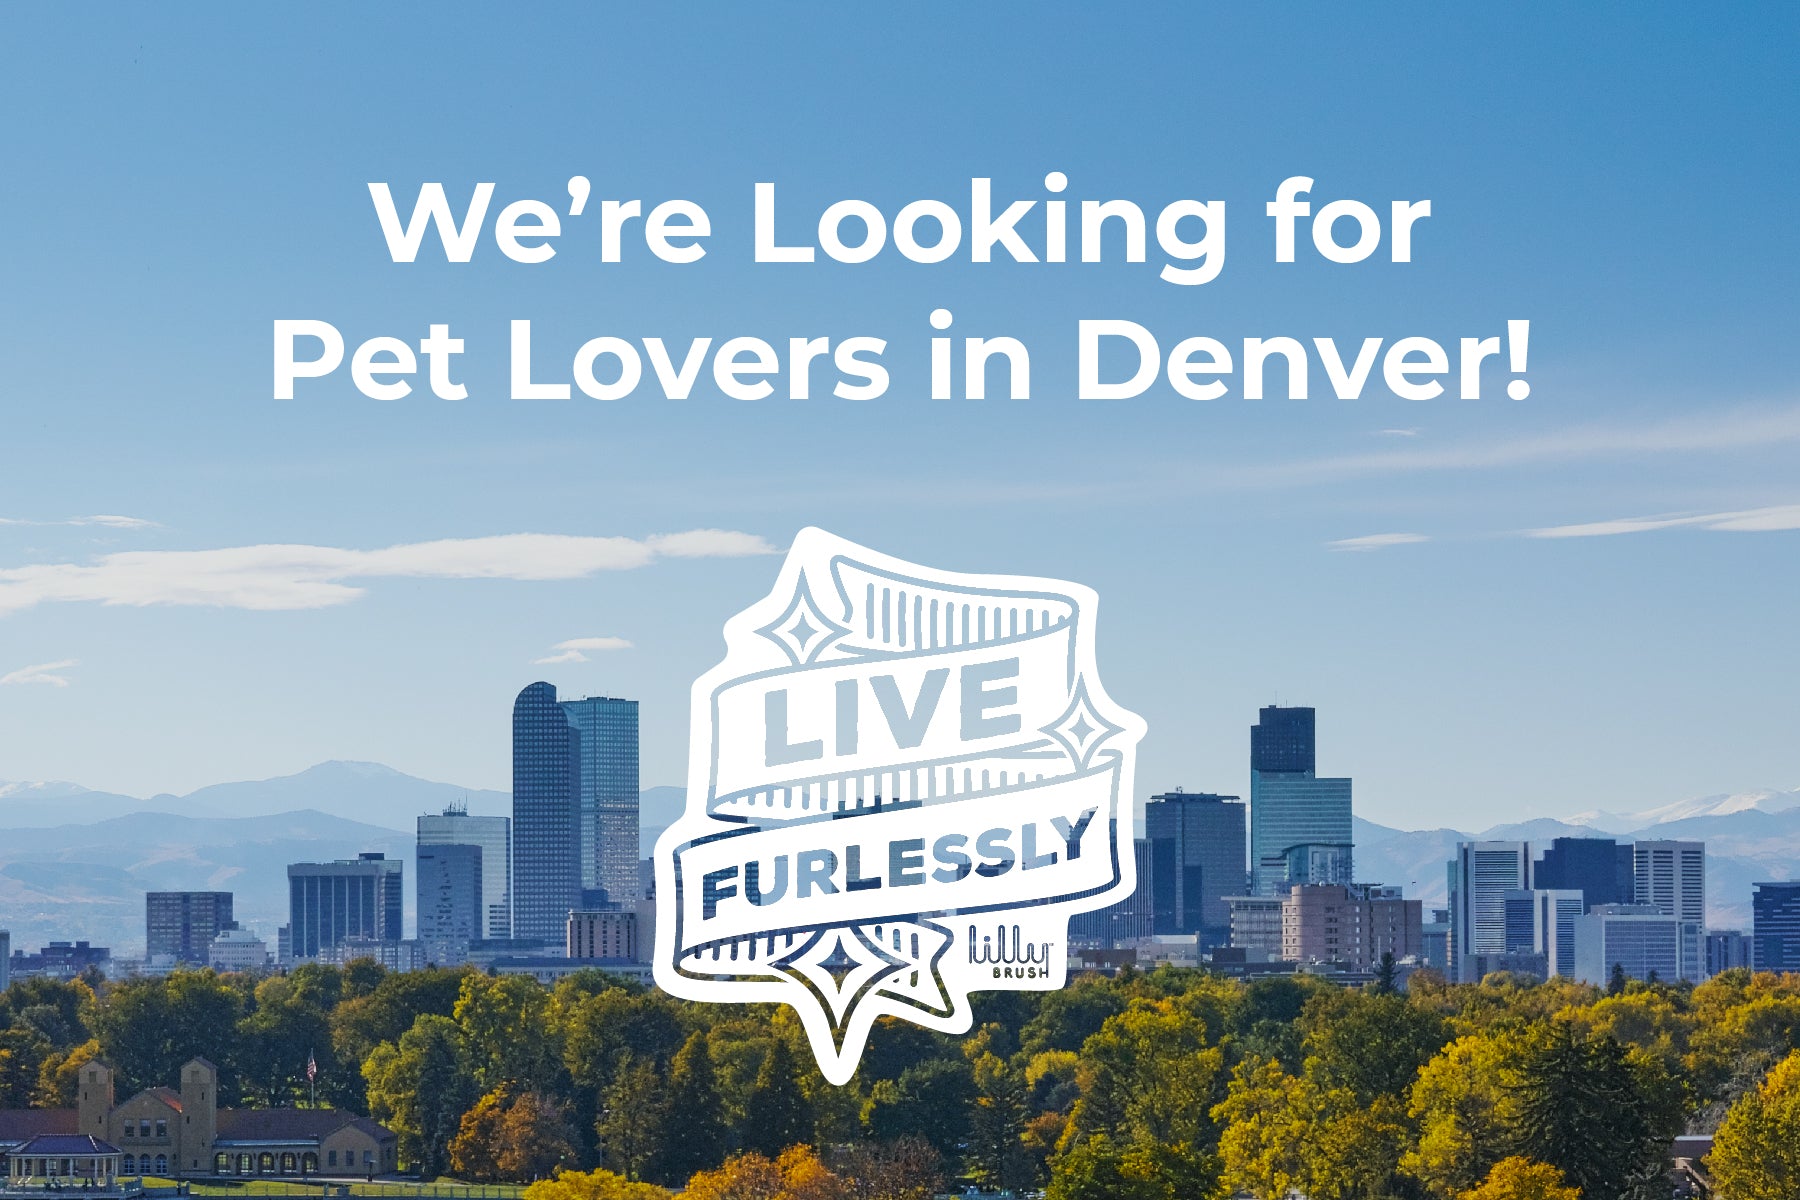 Hey Denver, let us know what you think!